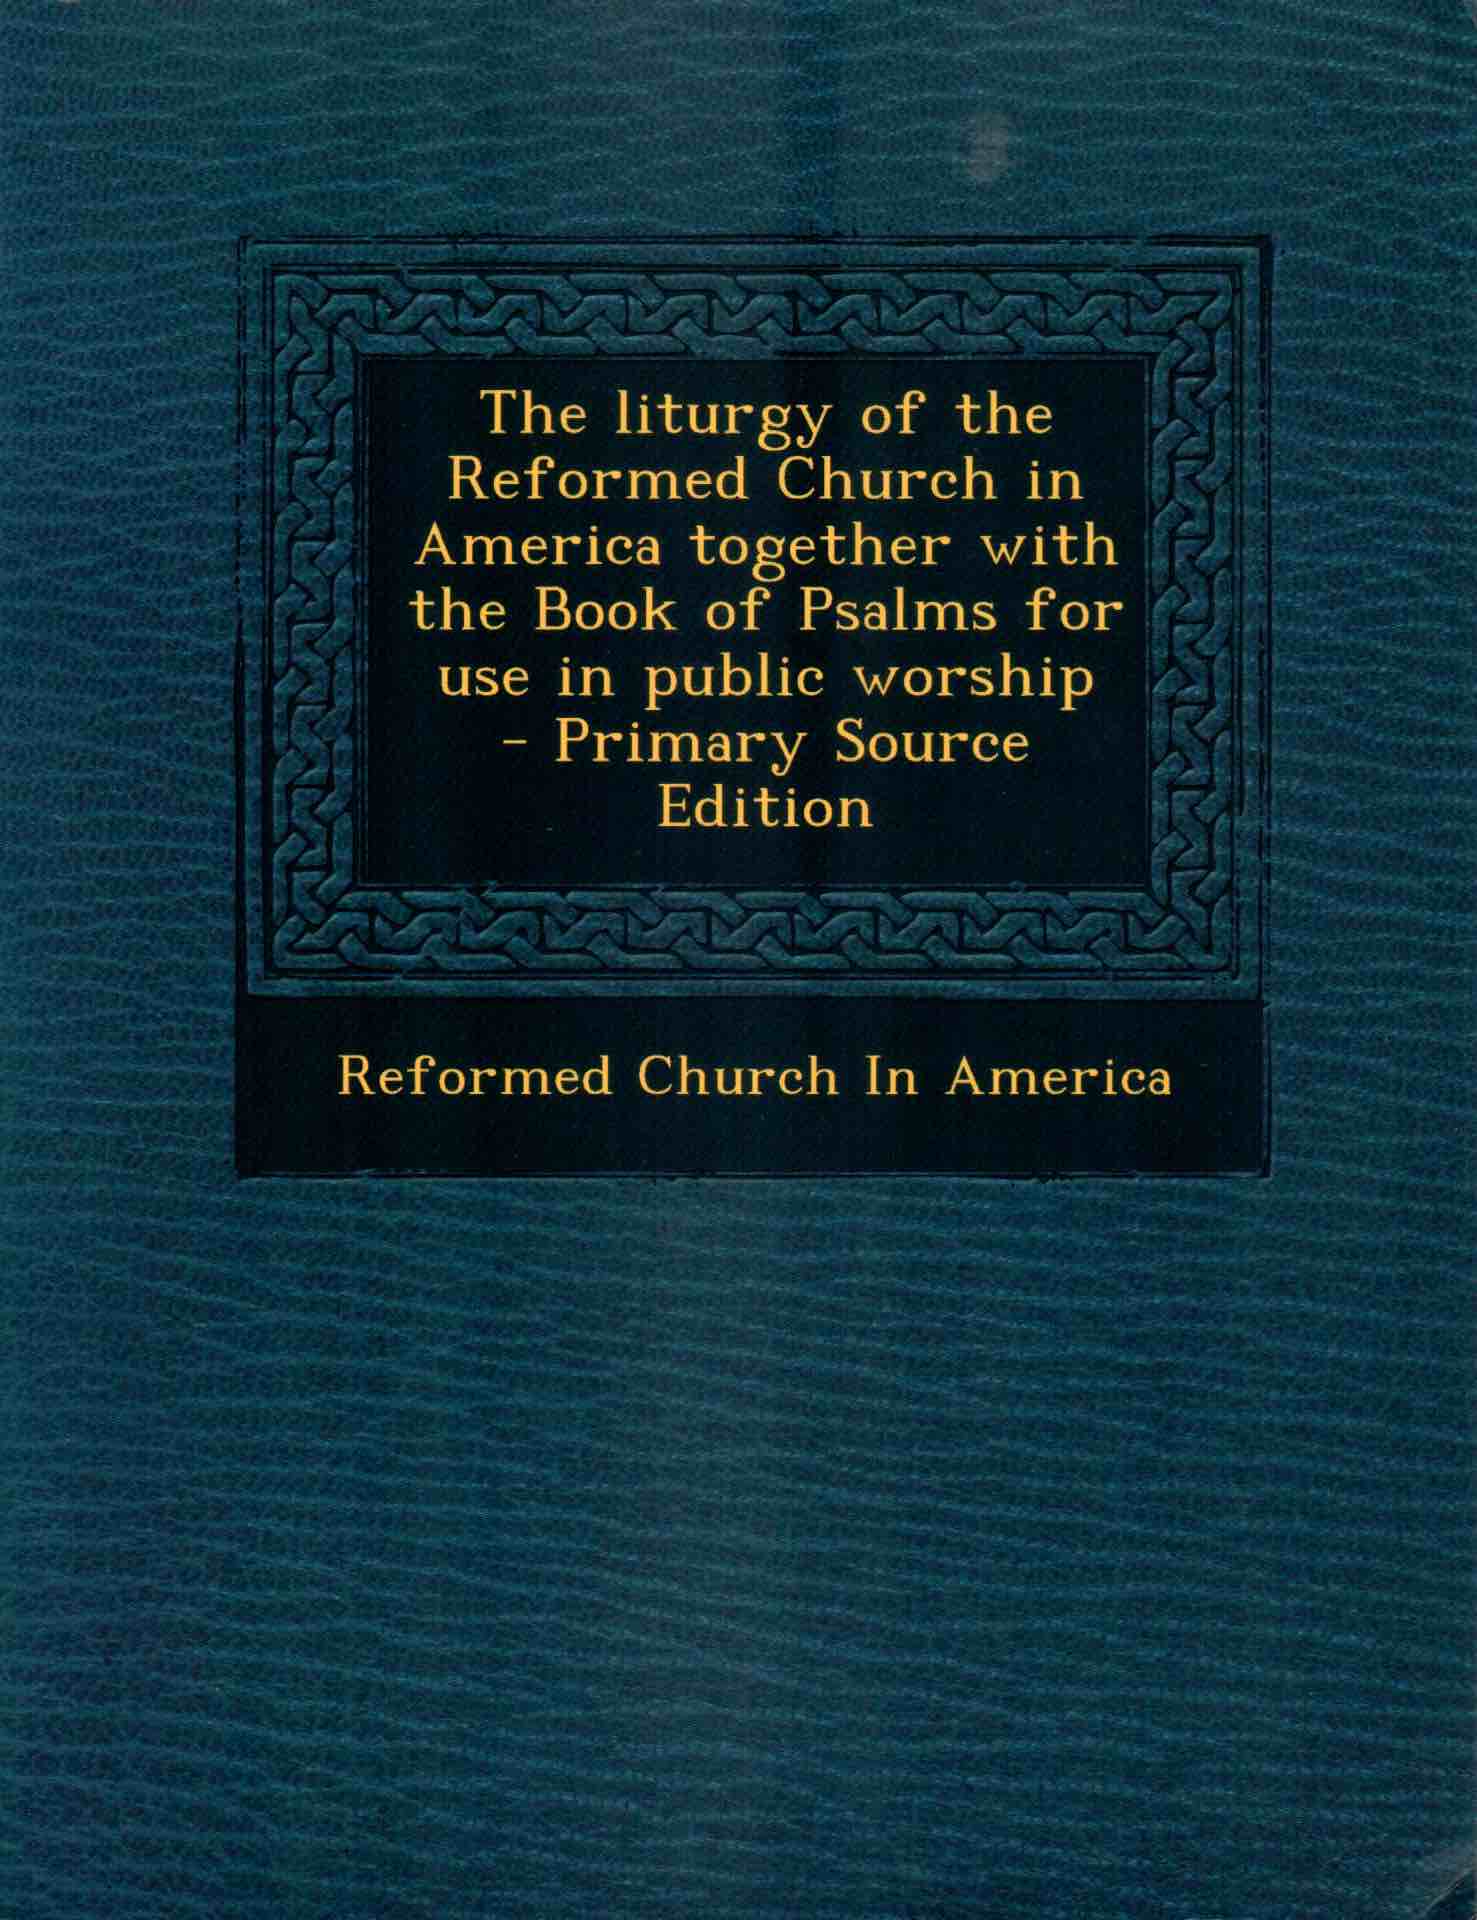 Cover of The Liturgy of the Reformed Church in America together with the Book of Psalms for use in Public Worship